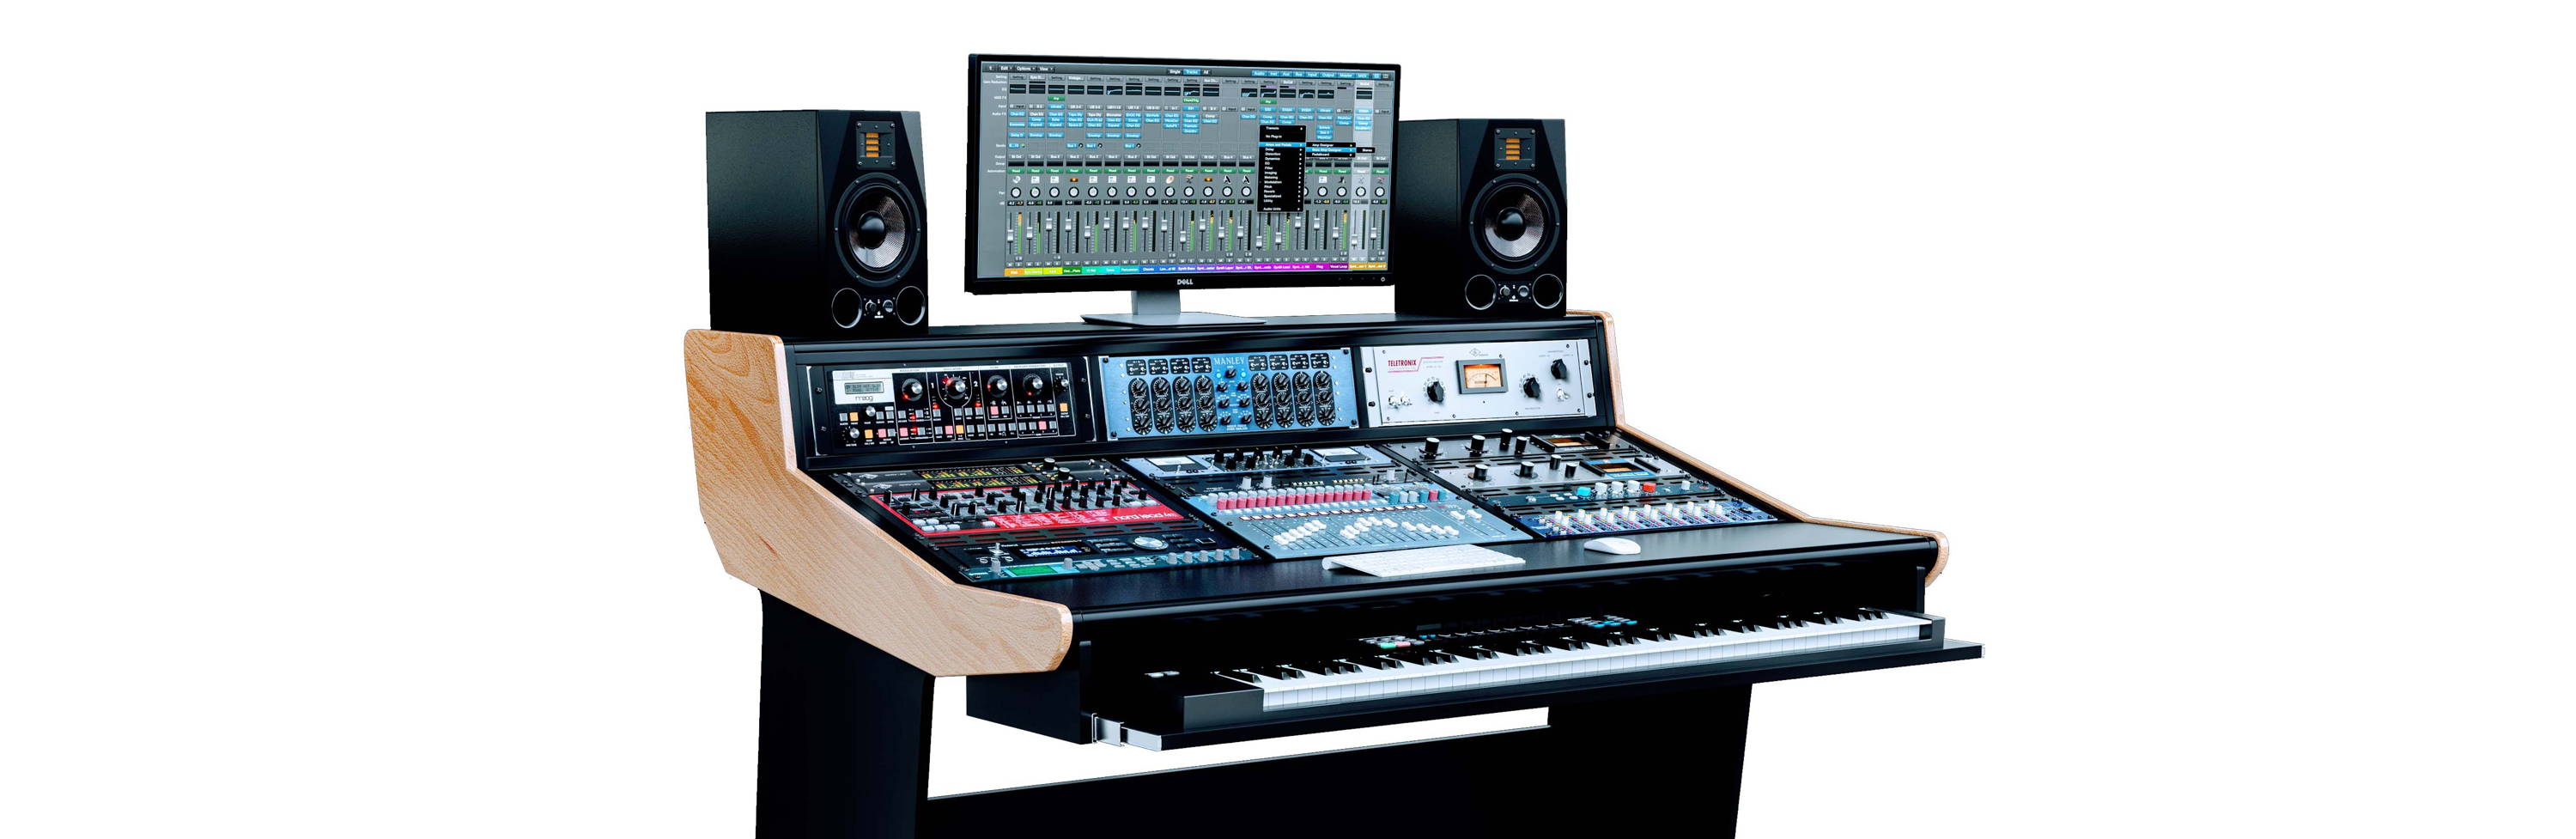 Buso Audio studio furniture for music and broadcast professionals